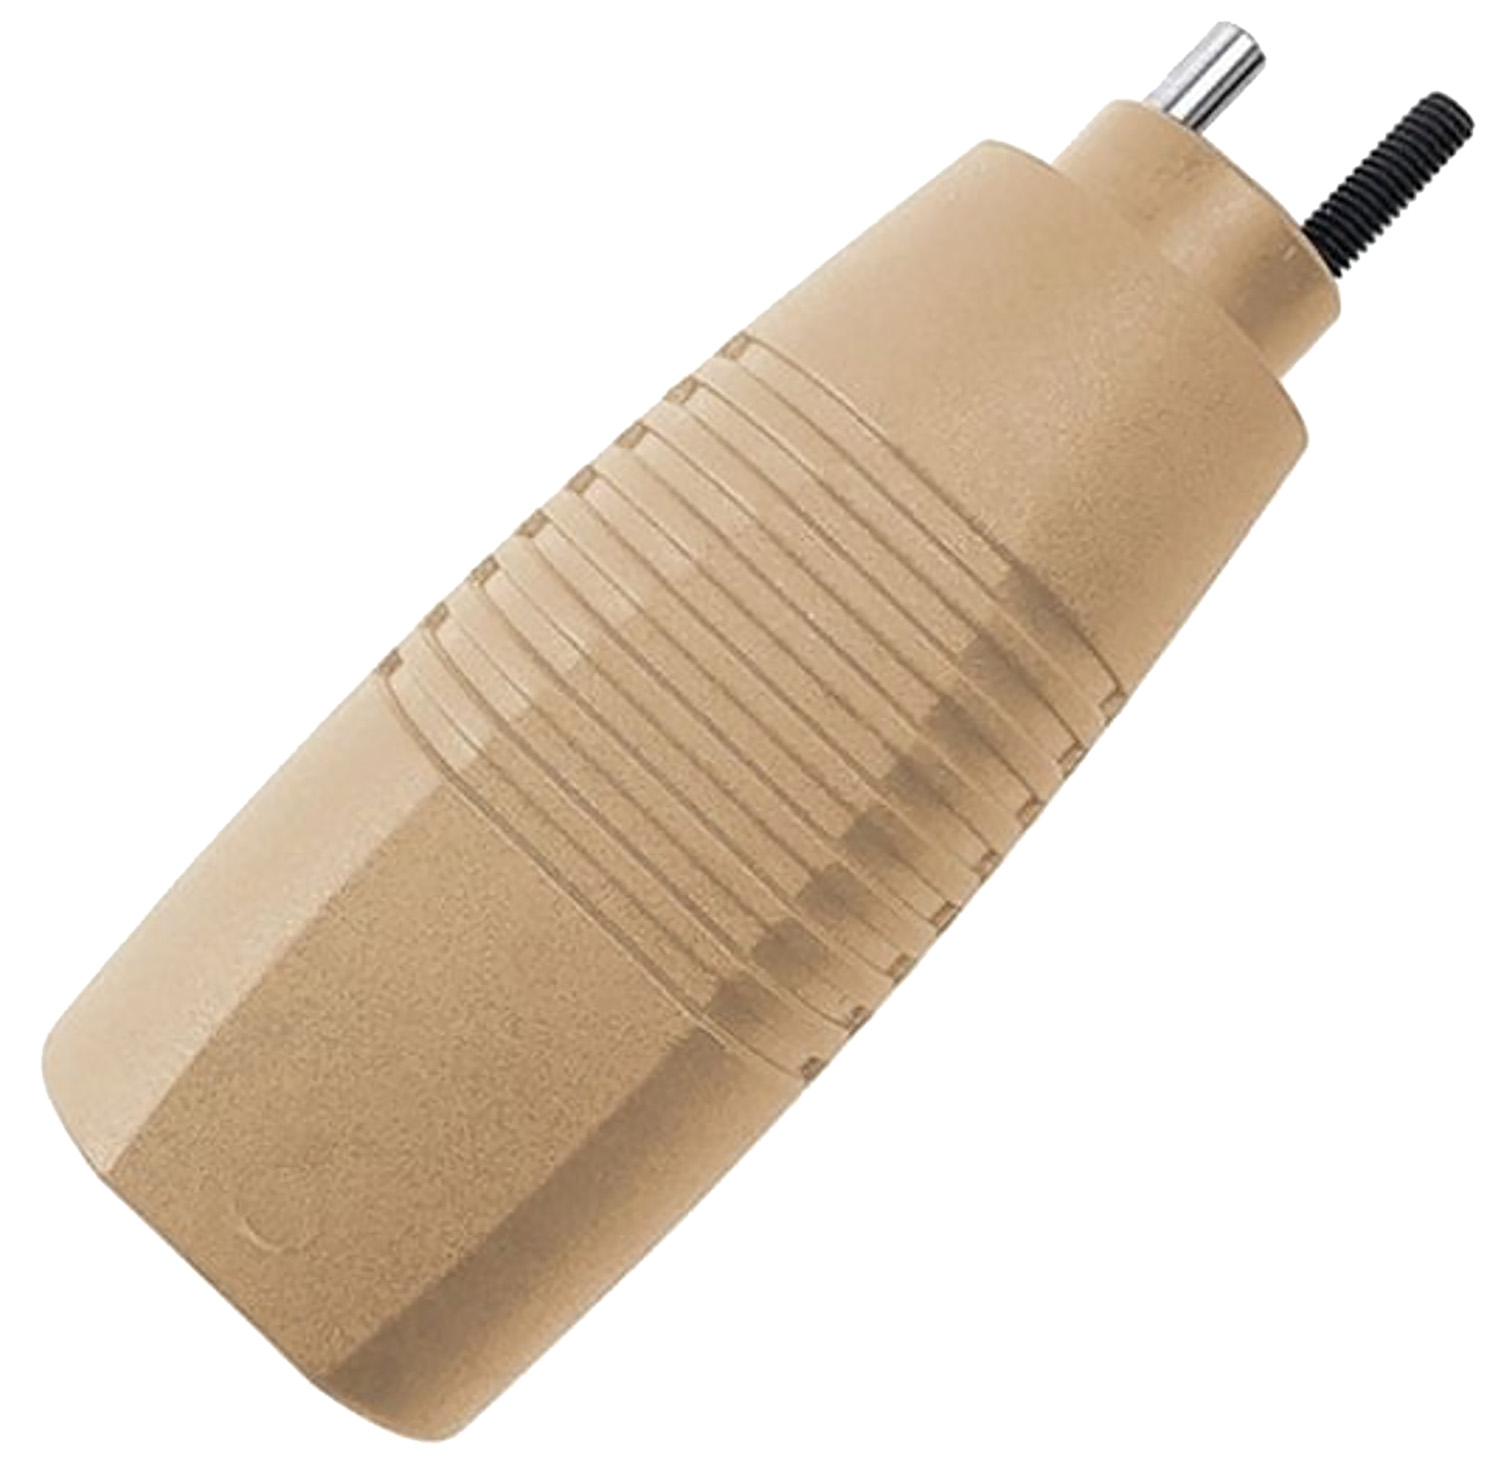 B&T Firearms 30671CT TP9N Foregrip Coyote Tan Polymer